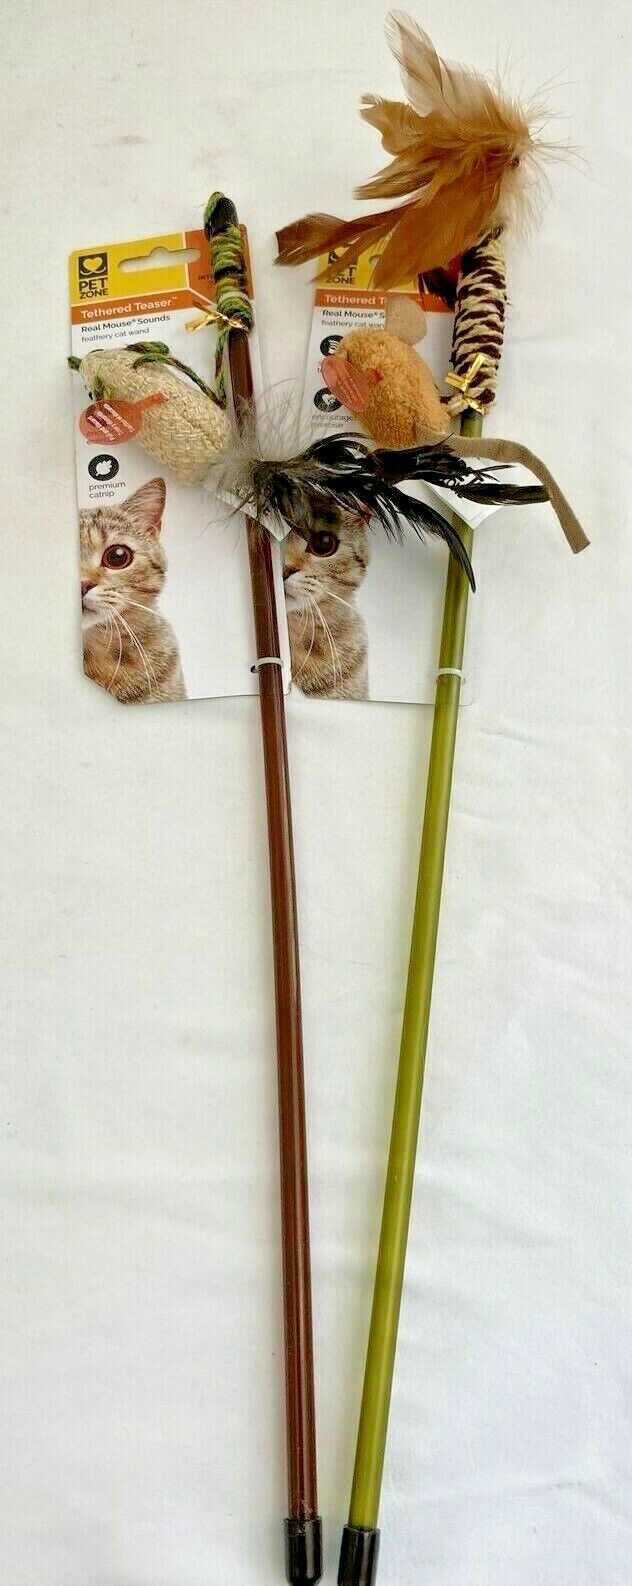 Lot of 2 Pet Zone Tethered Teaser Cat Wand Toy w/Feathers -Real Mouse Sound! Pet Zone- Cosmic Pet 12007